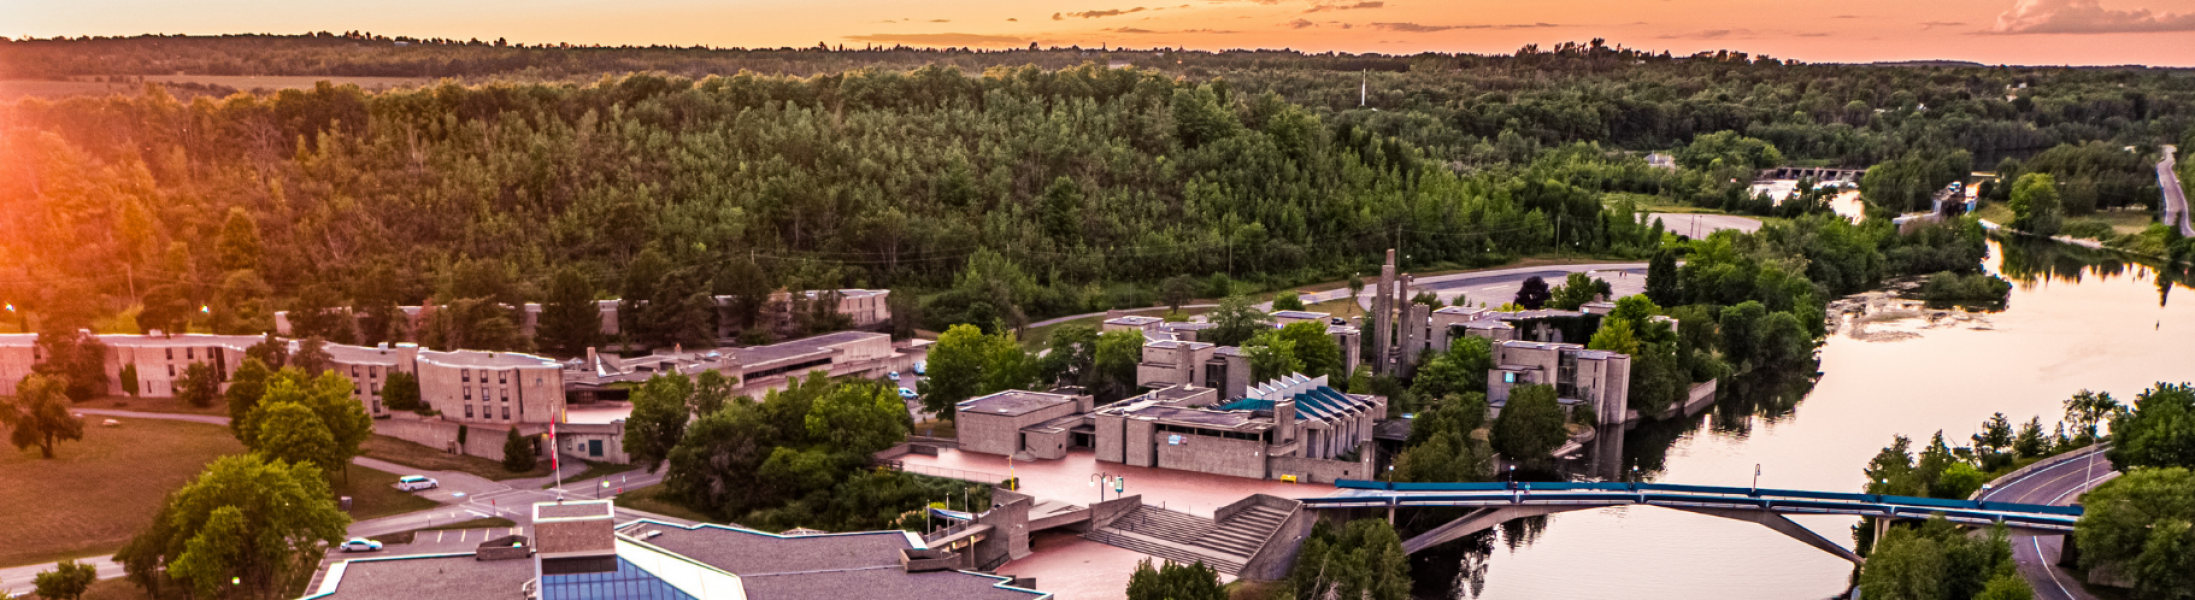 Trent University overview during sunset